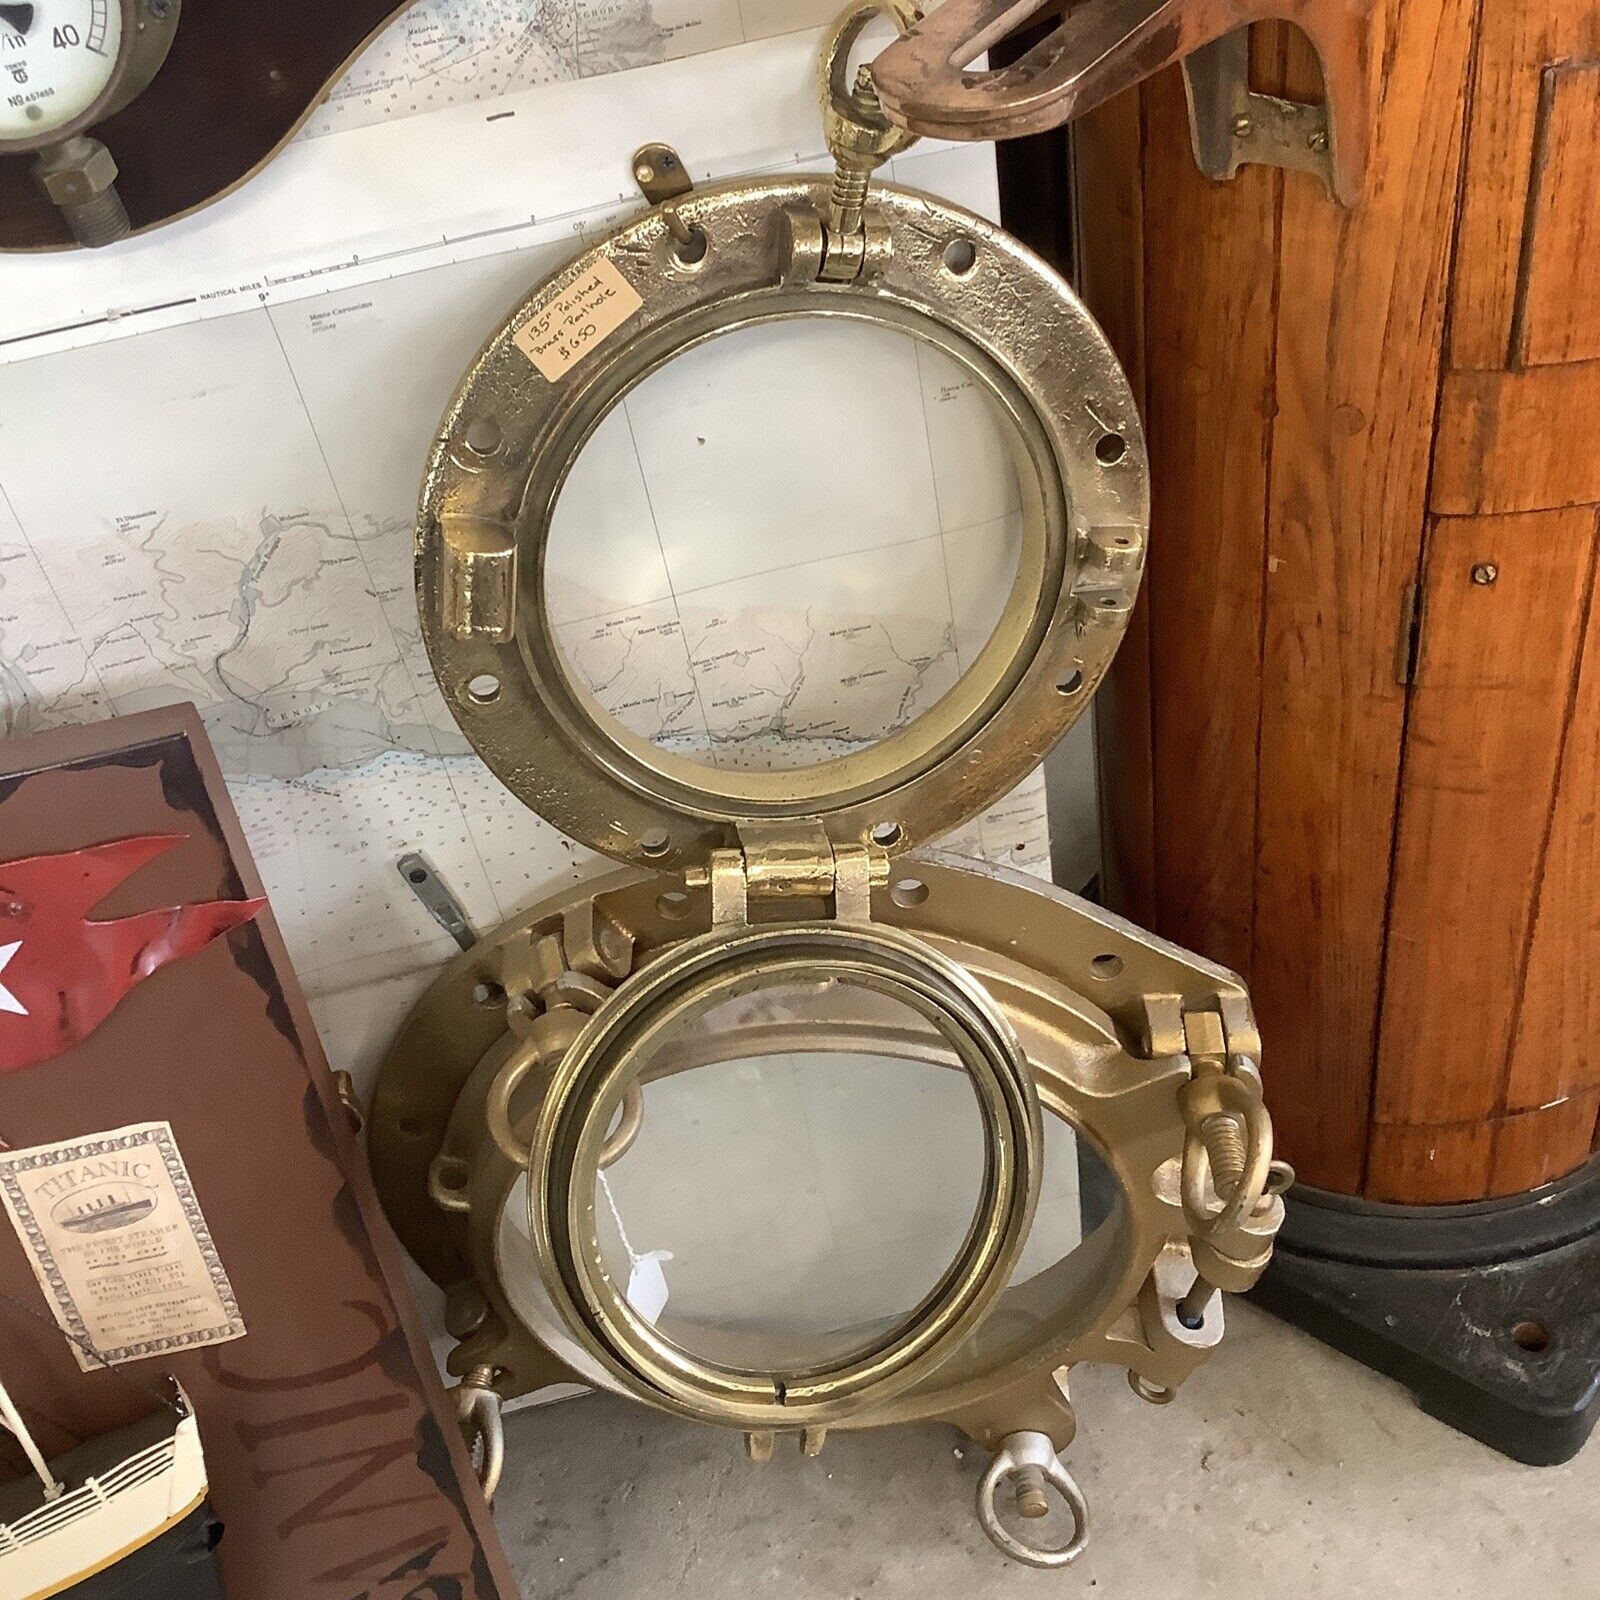 Shop Nautical Antiques and Collectibles - Shop • Antiques of the Sea